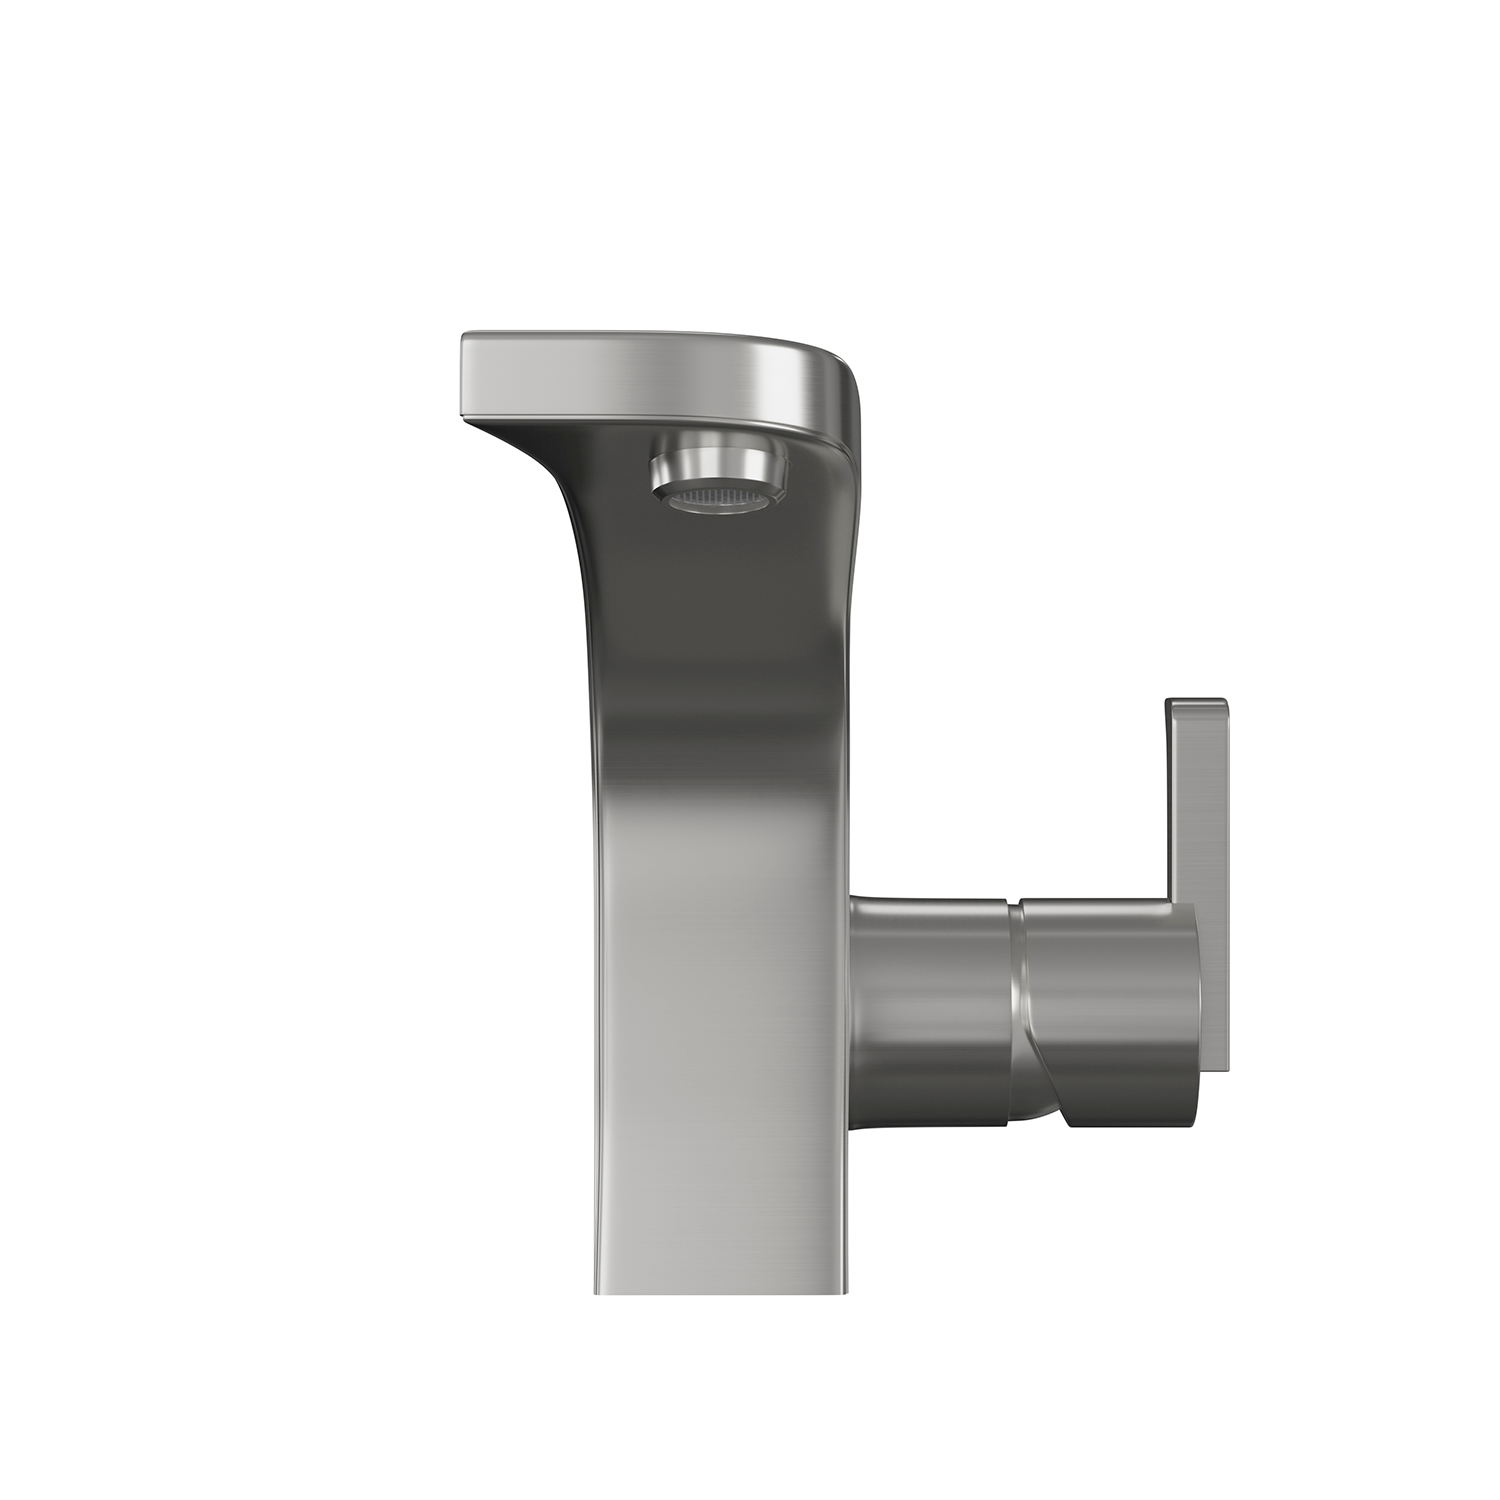 DAX Single Handle Bathroom Faucet, Stainless Steel Body, Brushed Finish, 4-13/16 x 6-1/16 Inches (DAX-010-05)